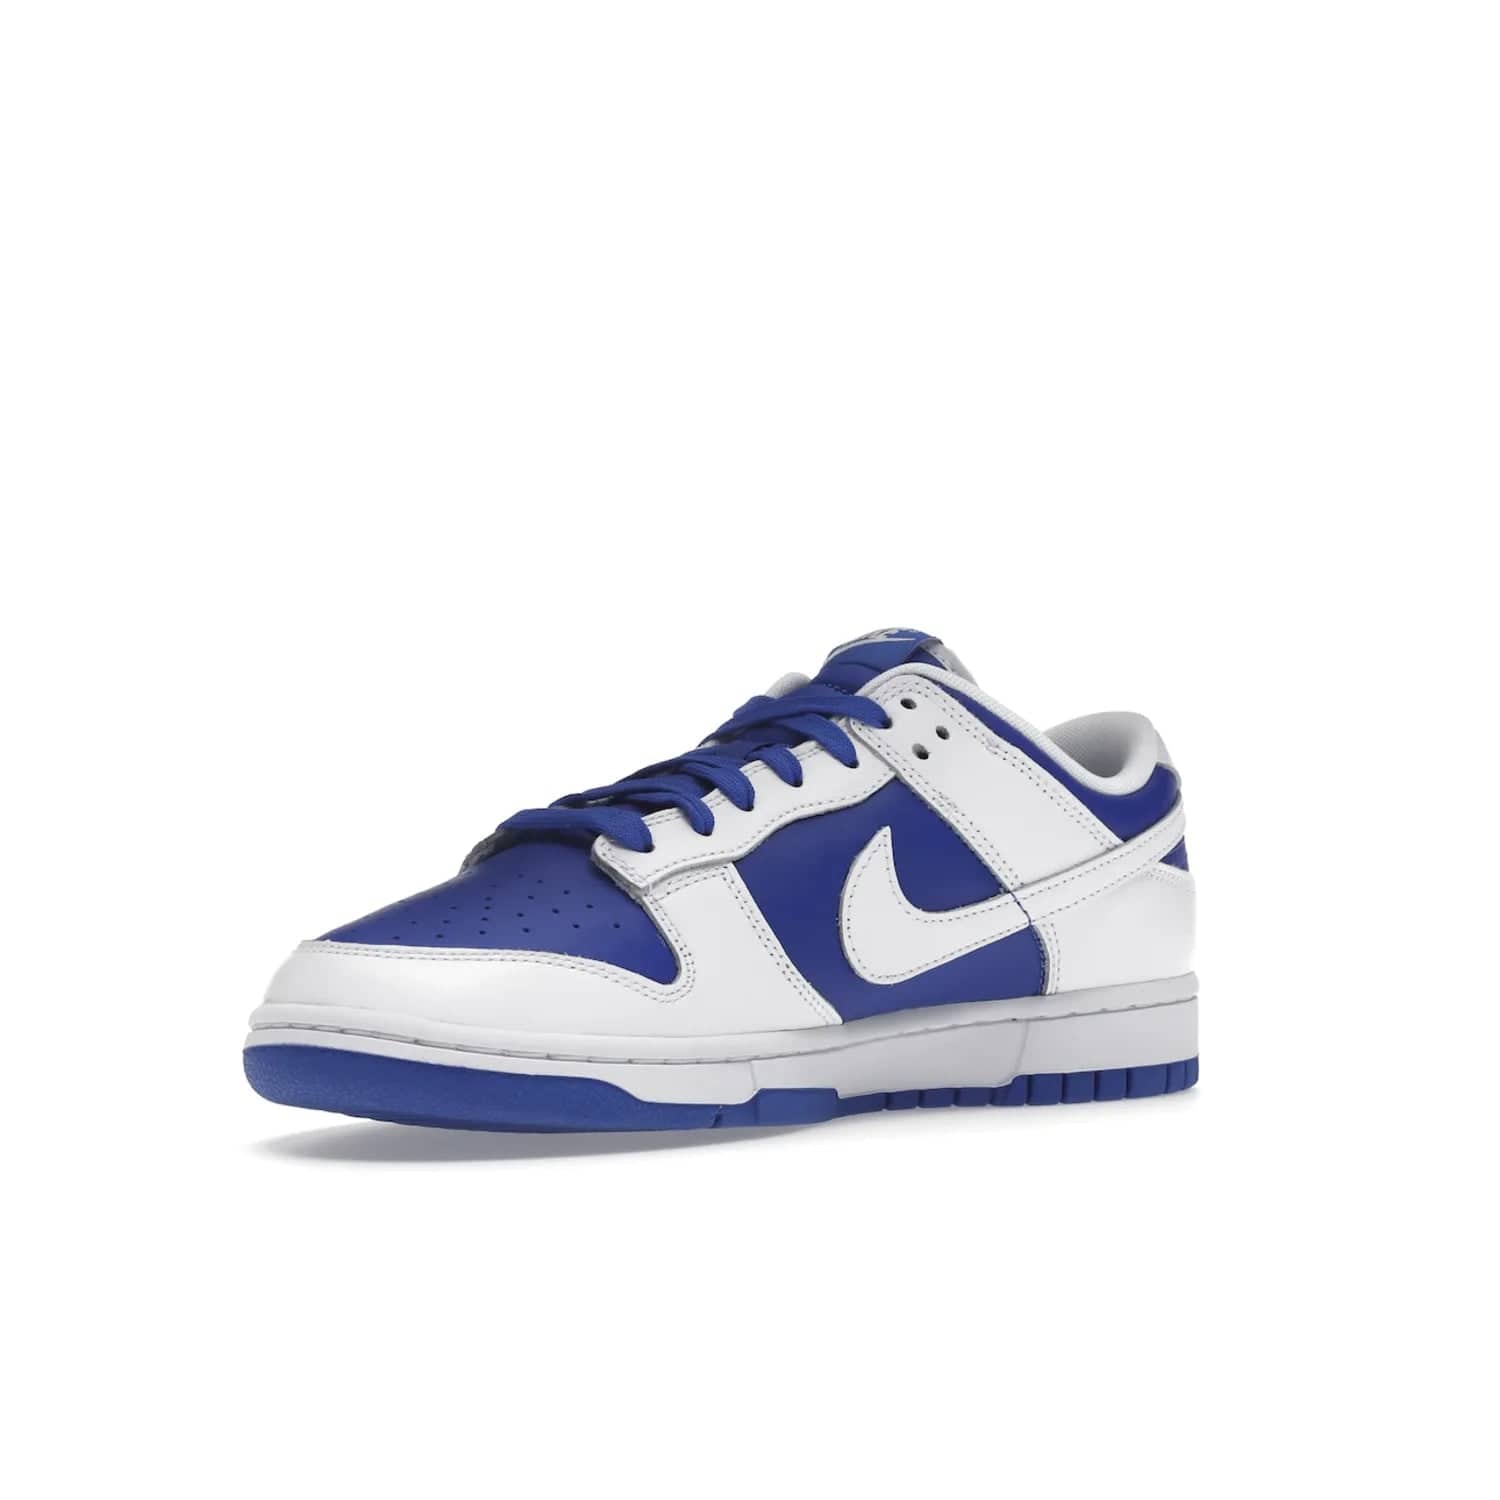 Nike Dunk Low Racer Blue White - Image 15 - Only at www.BallersClubKickz.com - Sleek Racer Blue leather upper and white leather overlays make up the Nike Dunk Low Racer Blue White. Woven tag and heel embroidery for a 1985 Dunk look with a matching EVA foam sole completes the classic colorway.